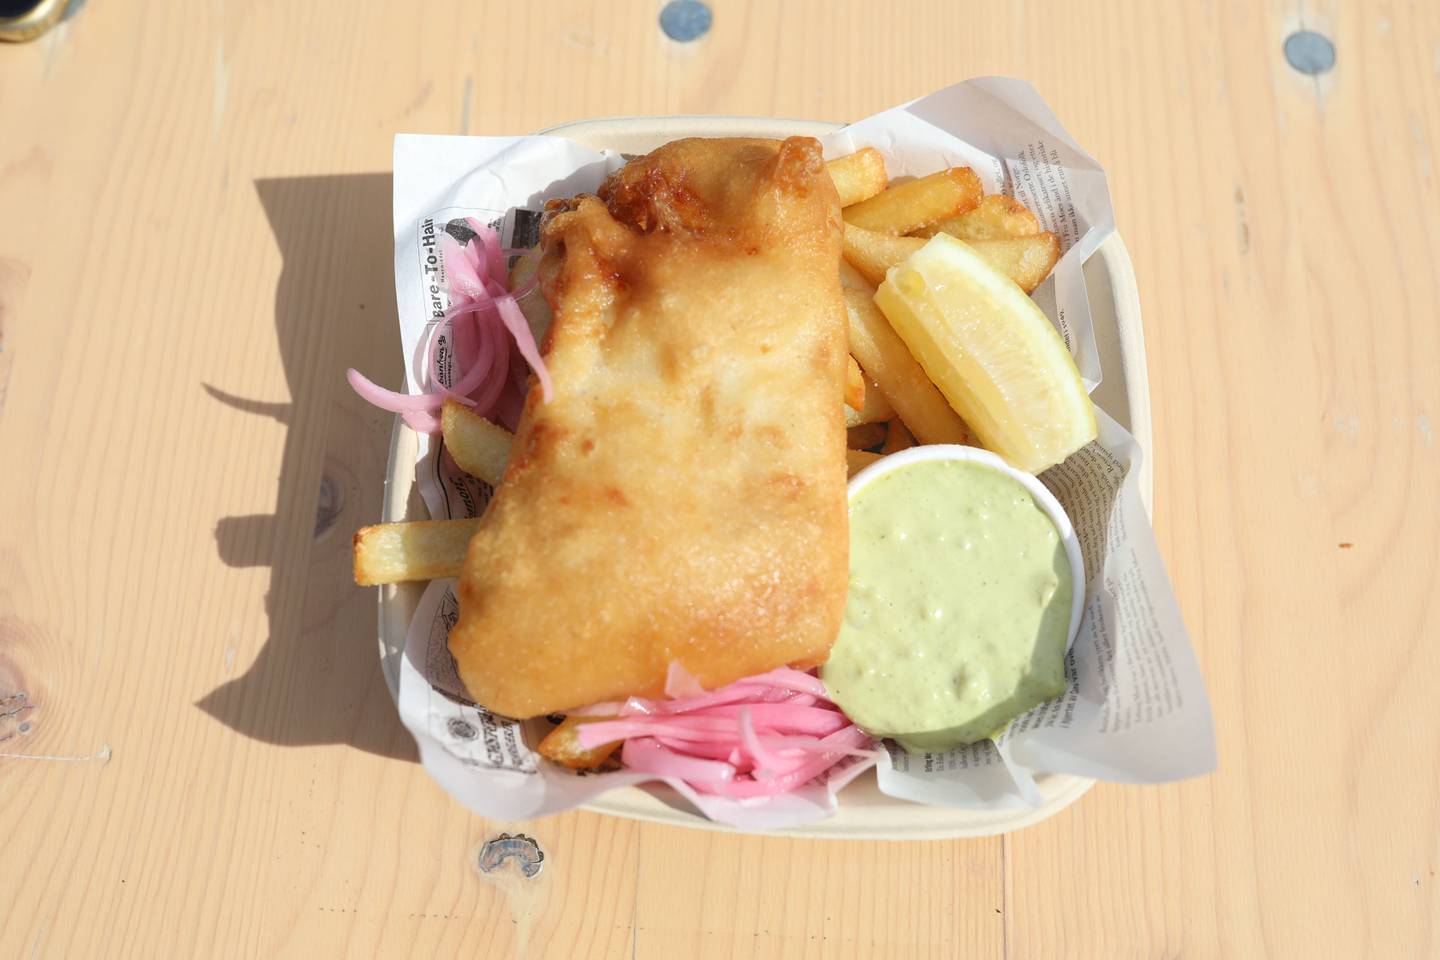 Fish and chips fra Fiskeriet.